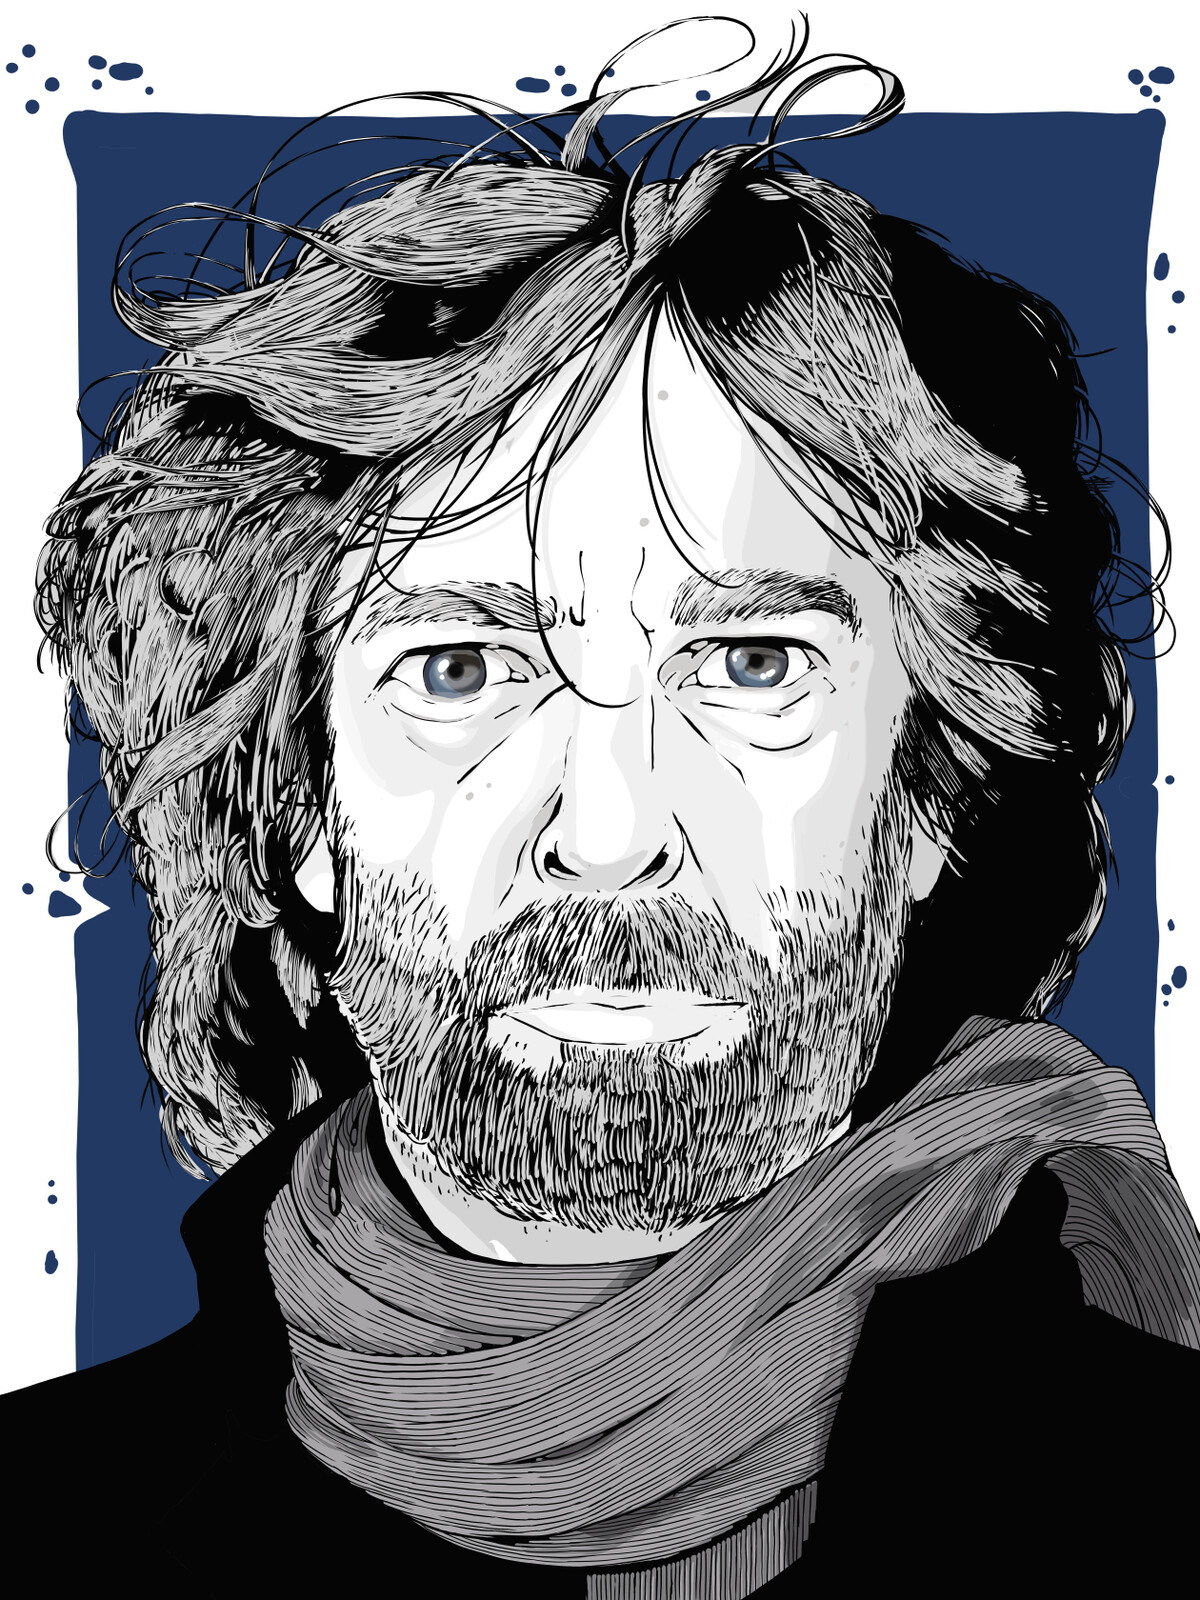 A greyscale illustration of Neil Gaiman with messy hair, scarf, and black overcoat. There is a blue block background    